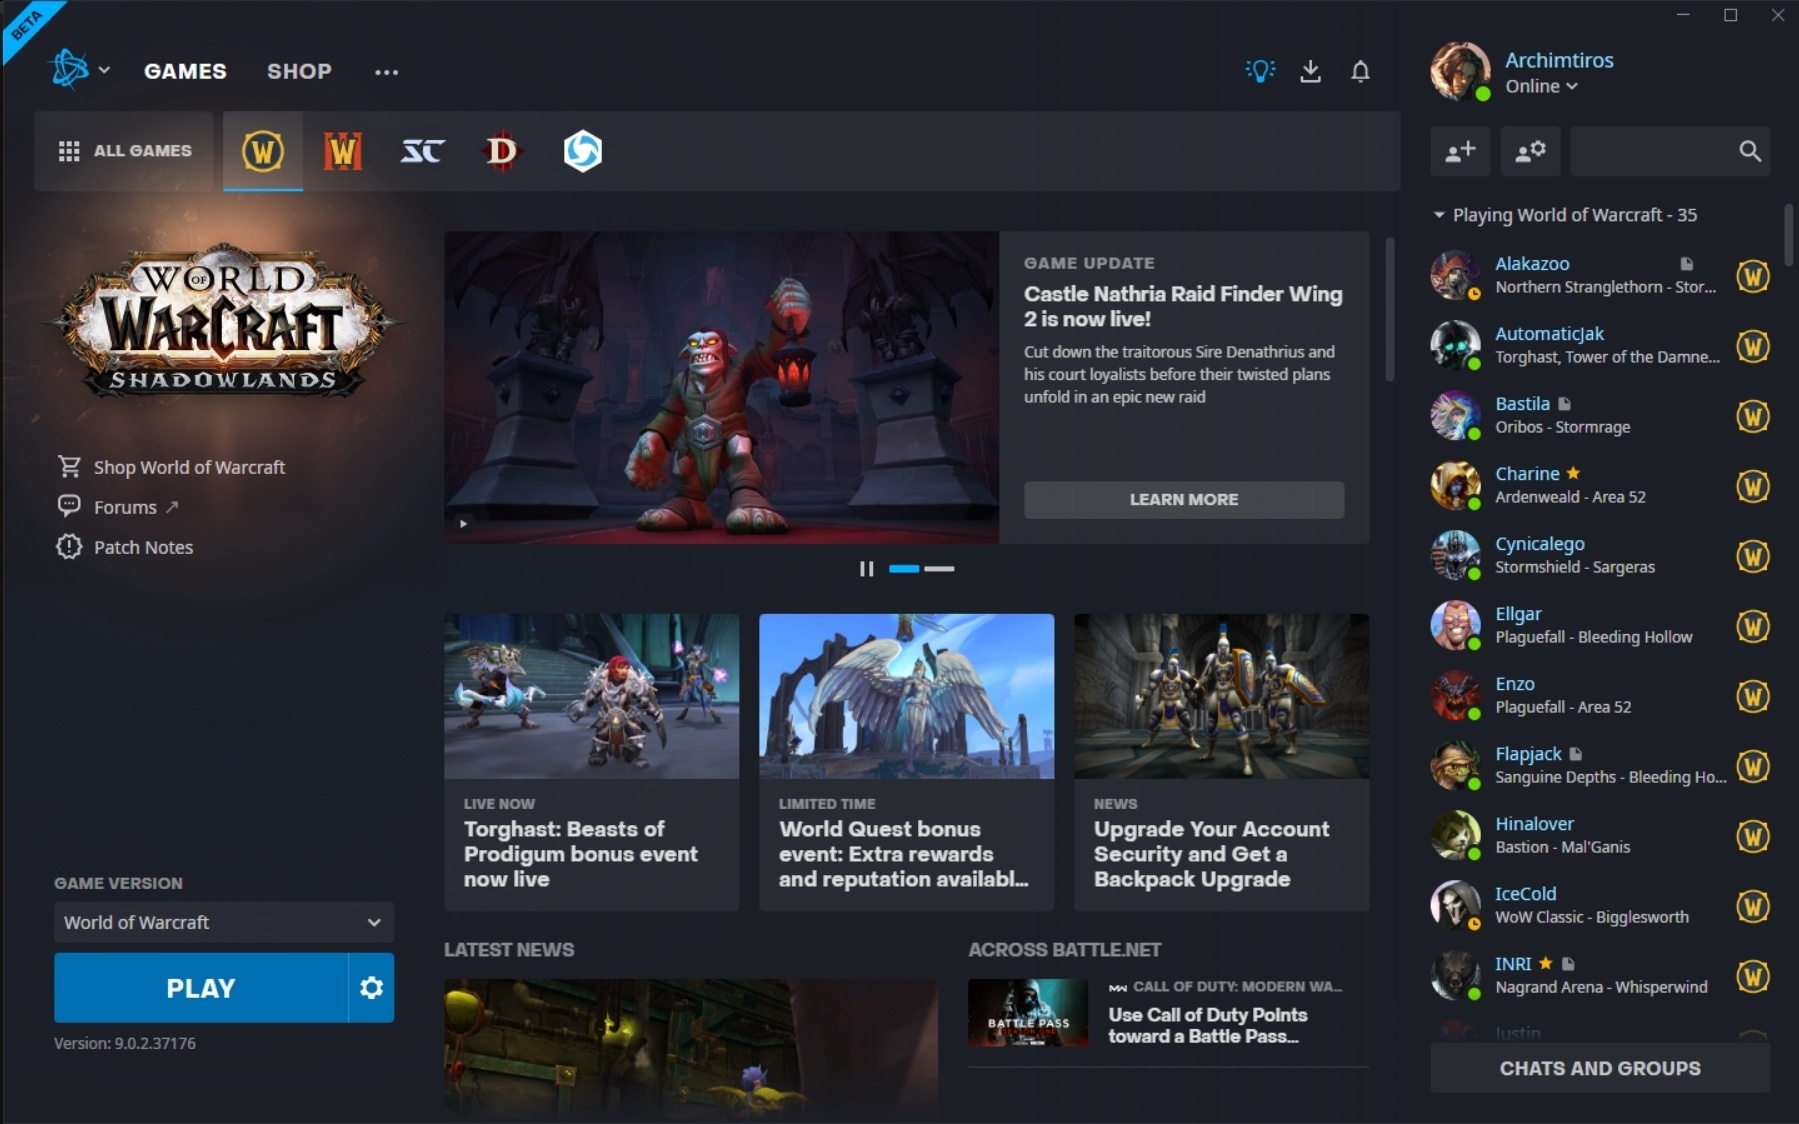 Battle.net Launcher 2.0 Makeover Going Live in North America - Wowhead News